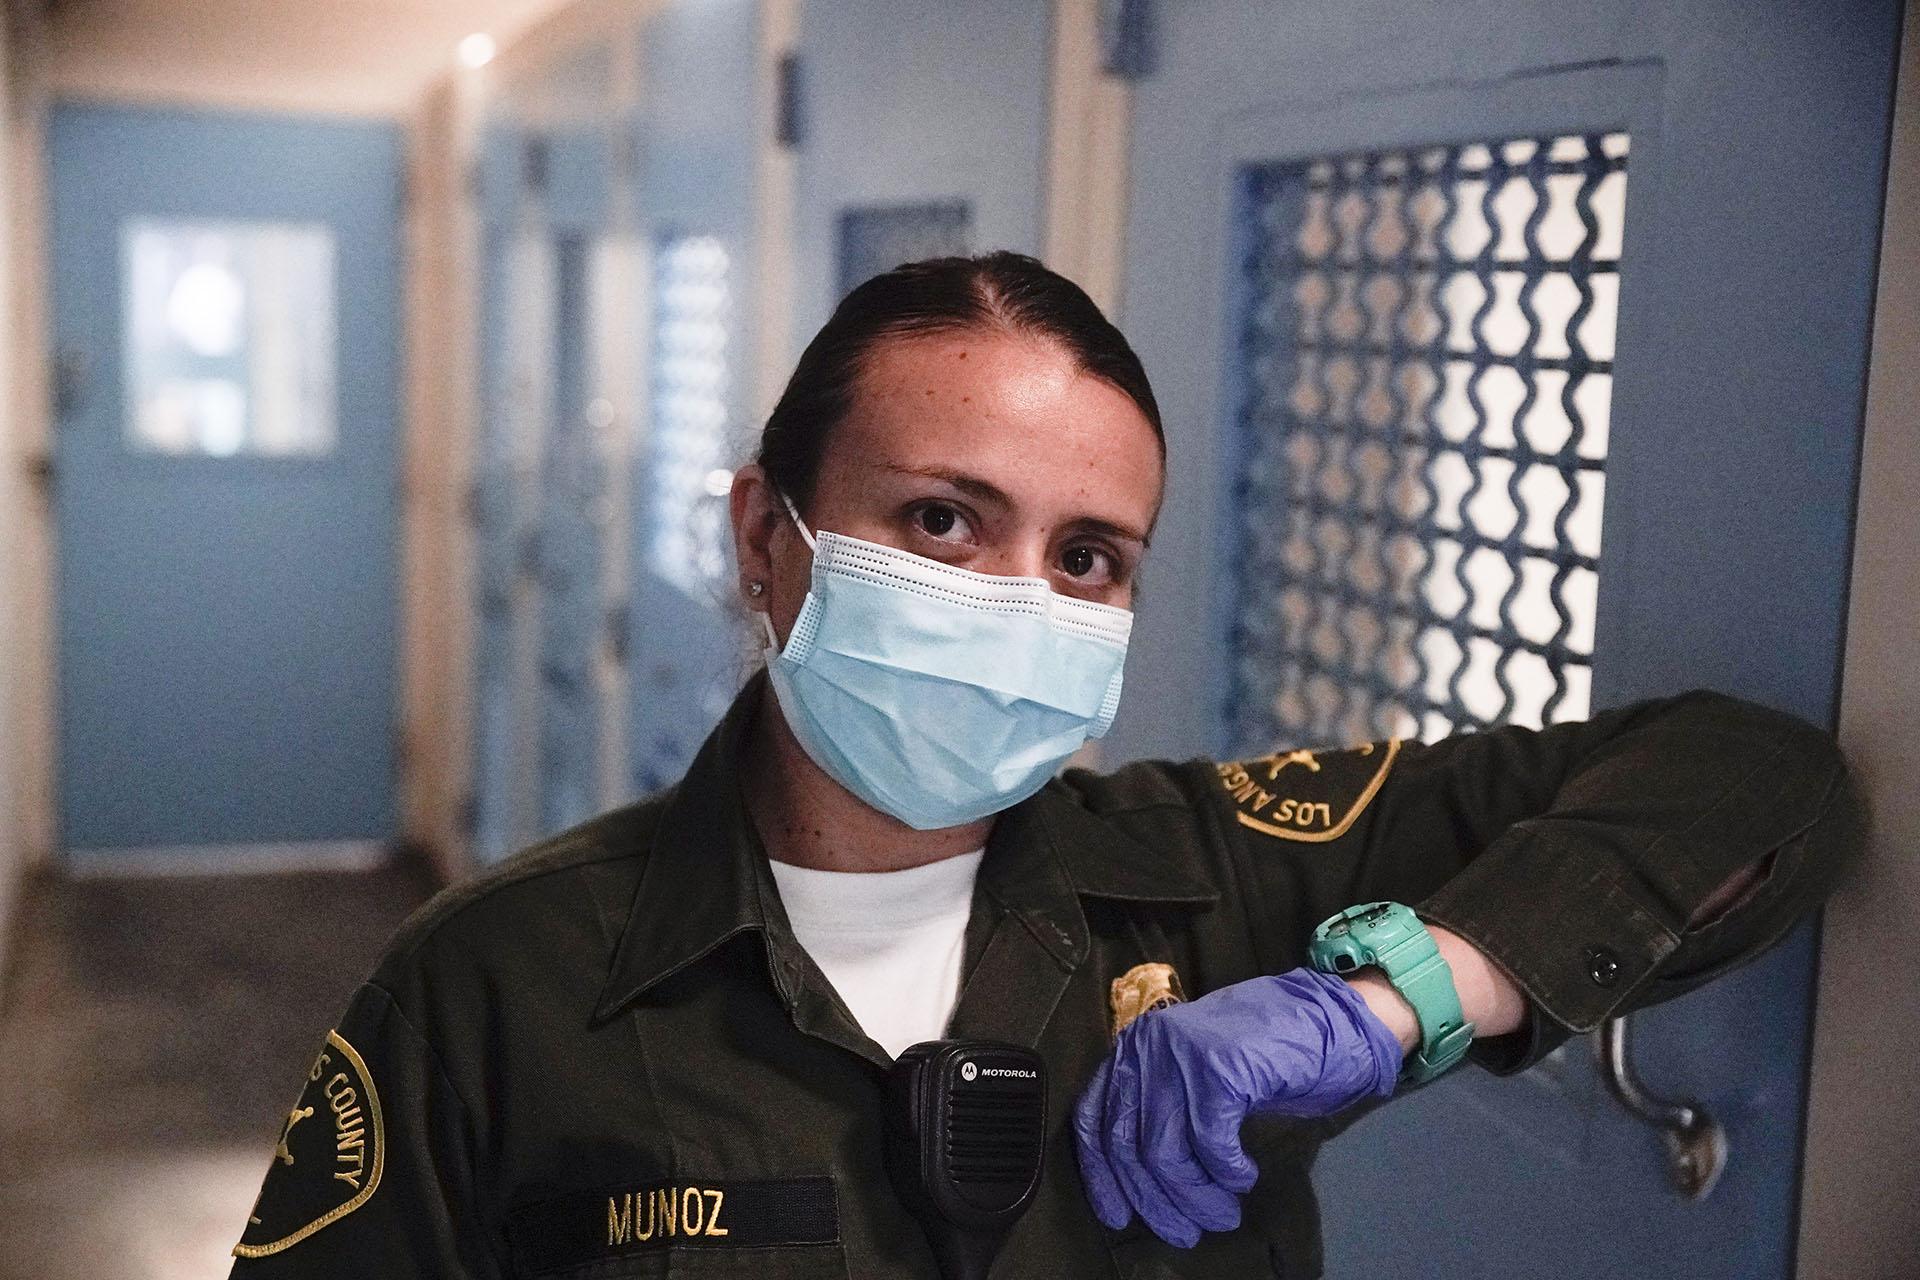 In this April 16, 2020, photo Sonia Munoz, a custody assistant, poses for a picture at the hospital ward of the Twin Towers jail in Los Angeles. Across the country first responders who’ve fallen ill from COVID-19, recovered have begun the harrowing experience of returning to jobs that put them back on the front lines of America's fight against the novel coronavirus. (AP Photo / Chris Carlson)